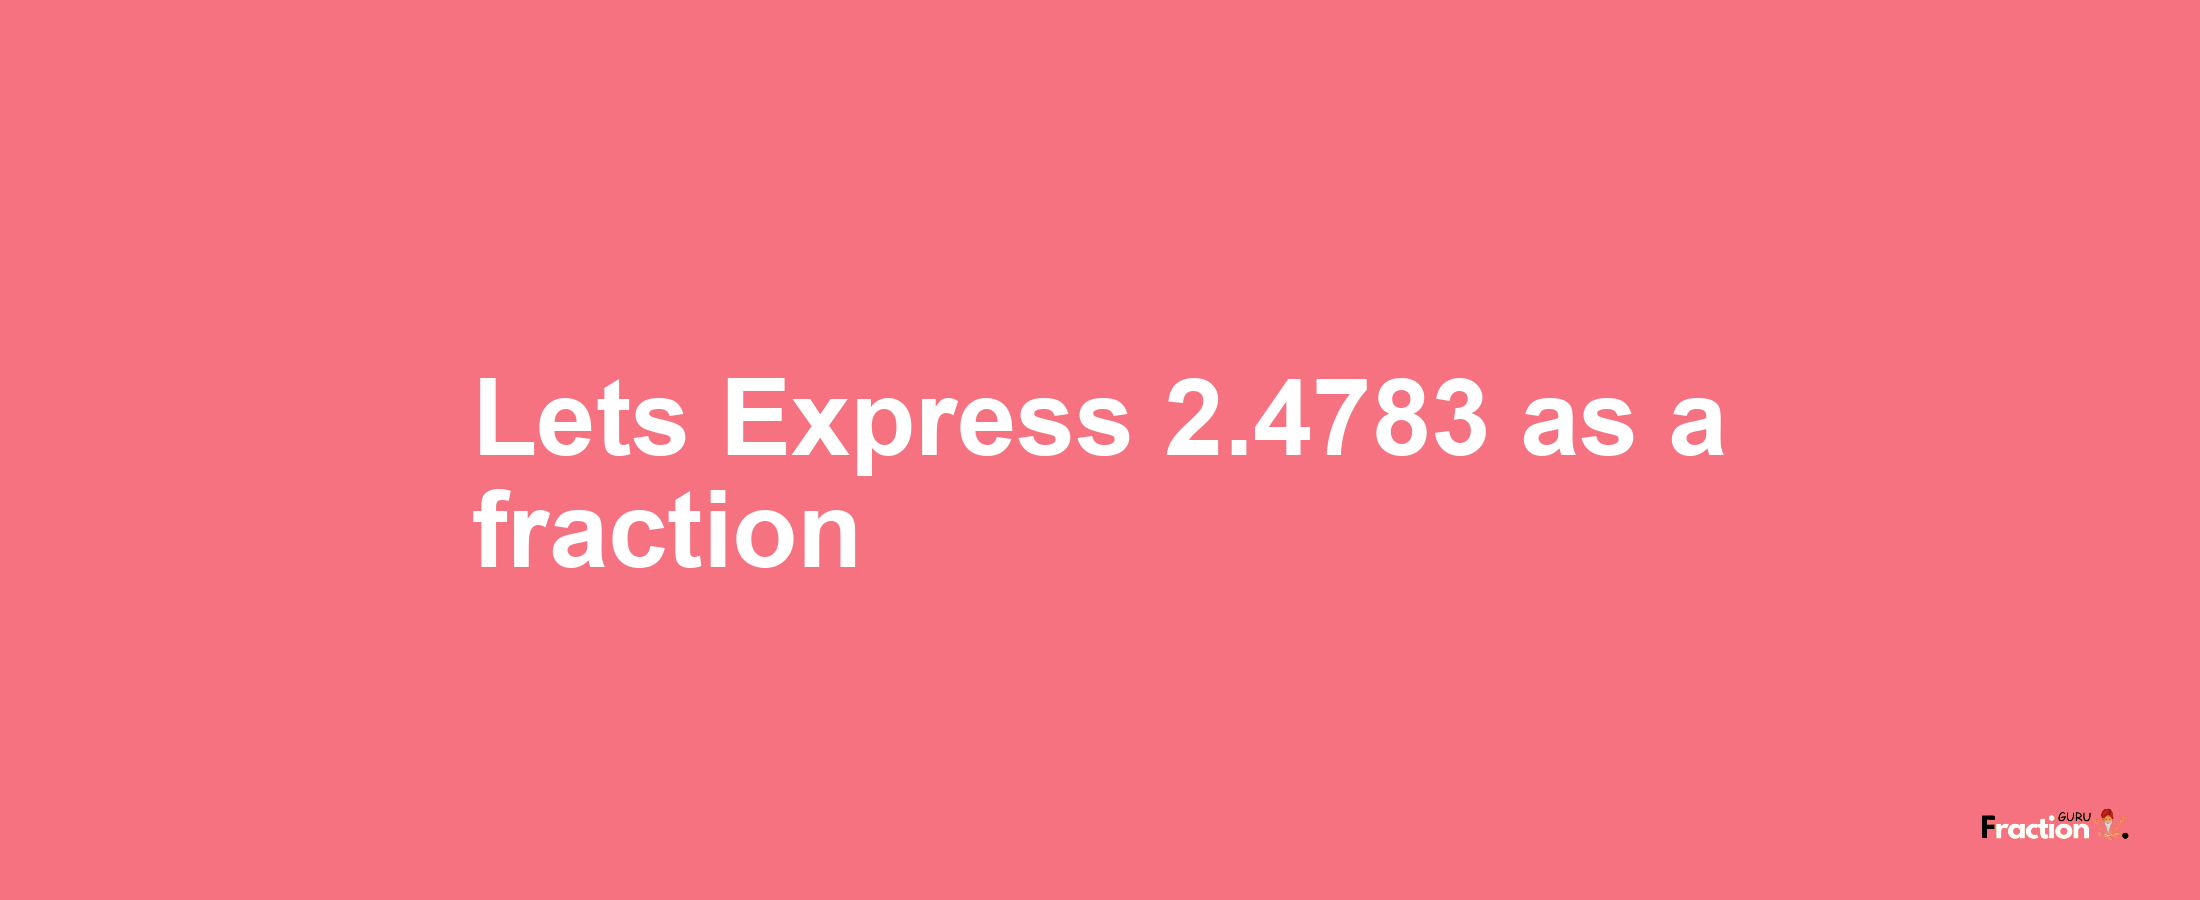 Lets Express 2.4783 as afraction